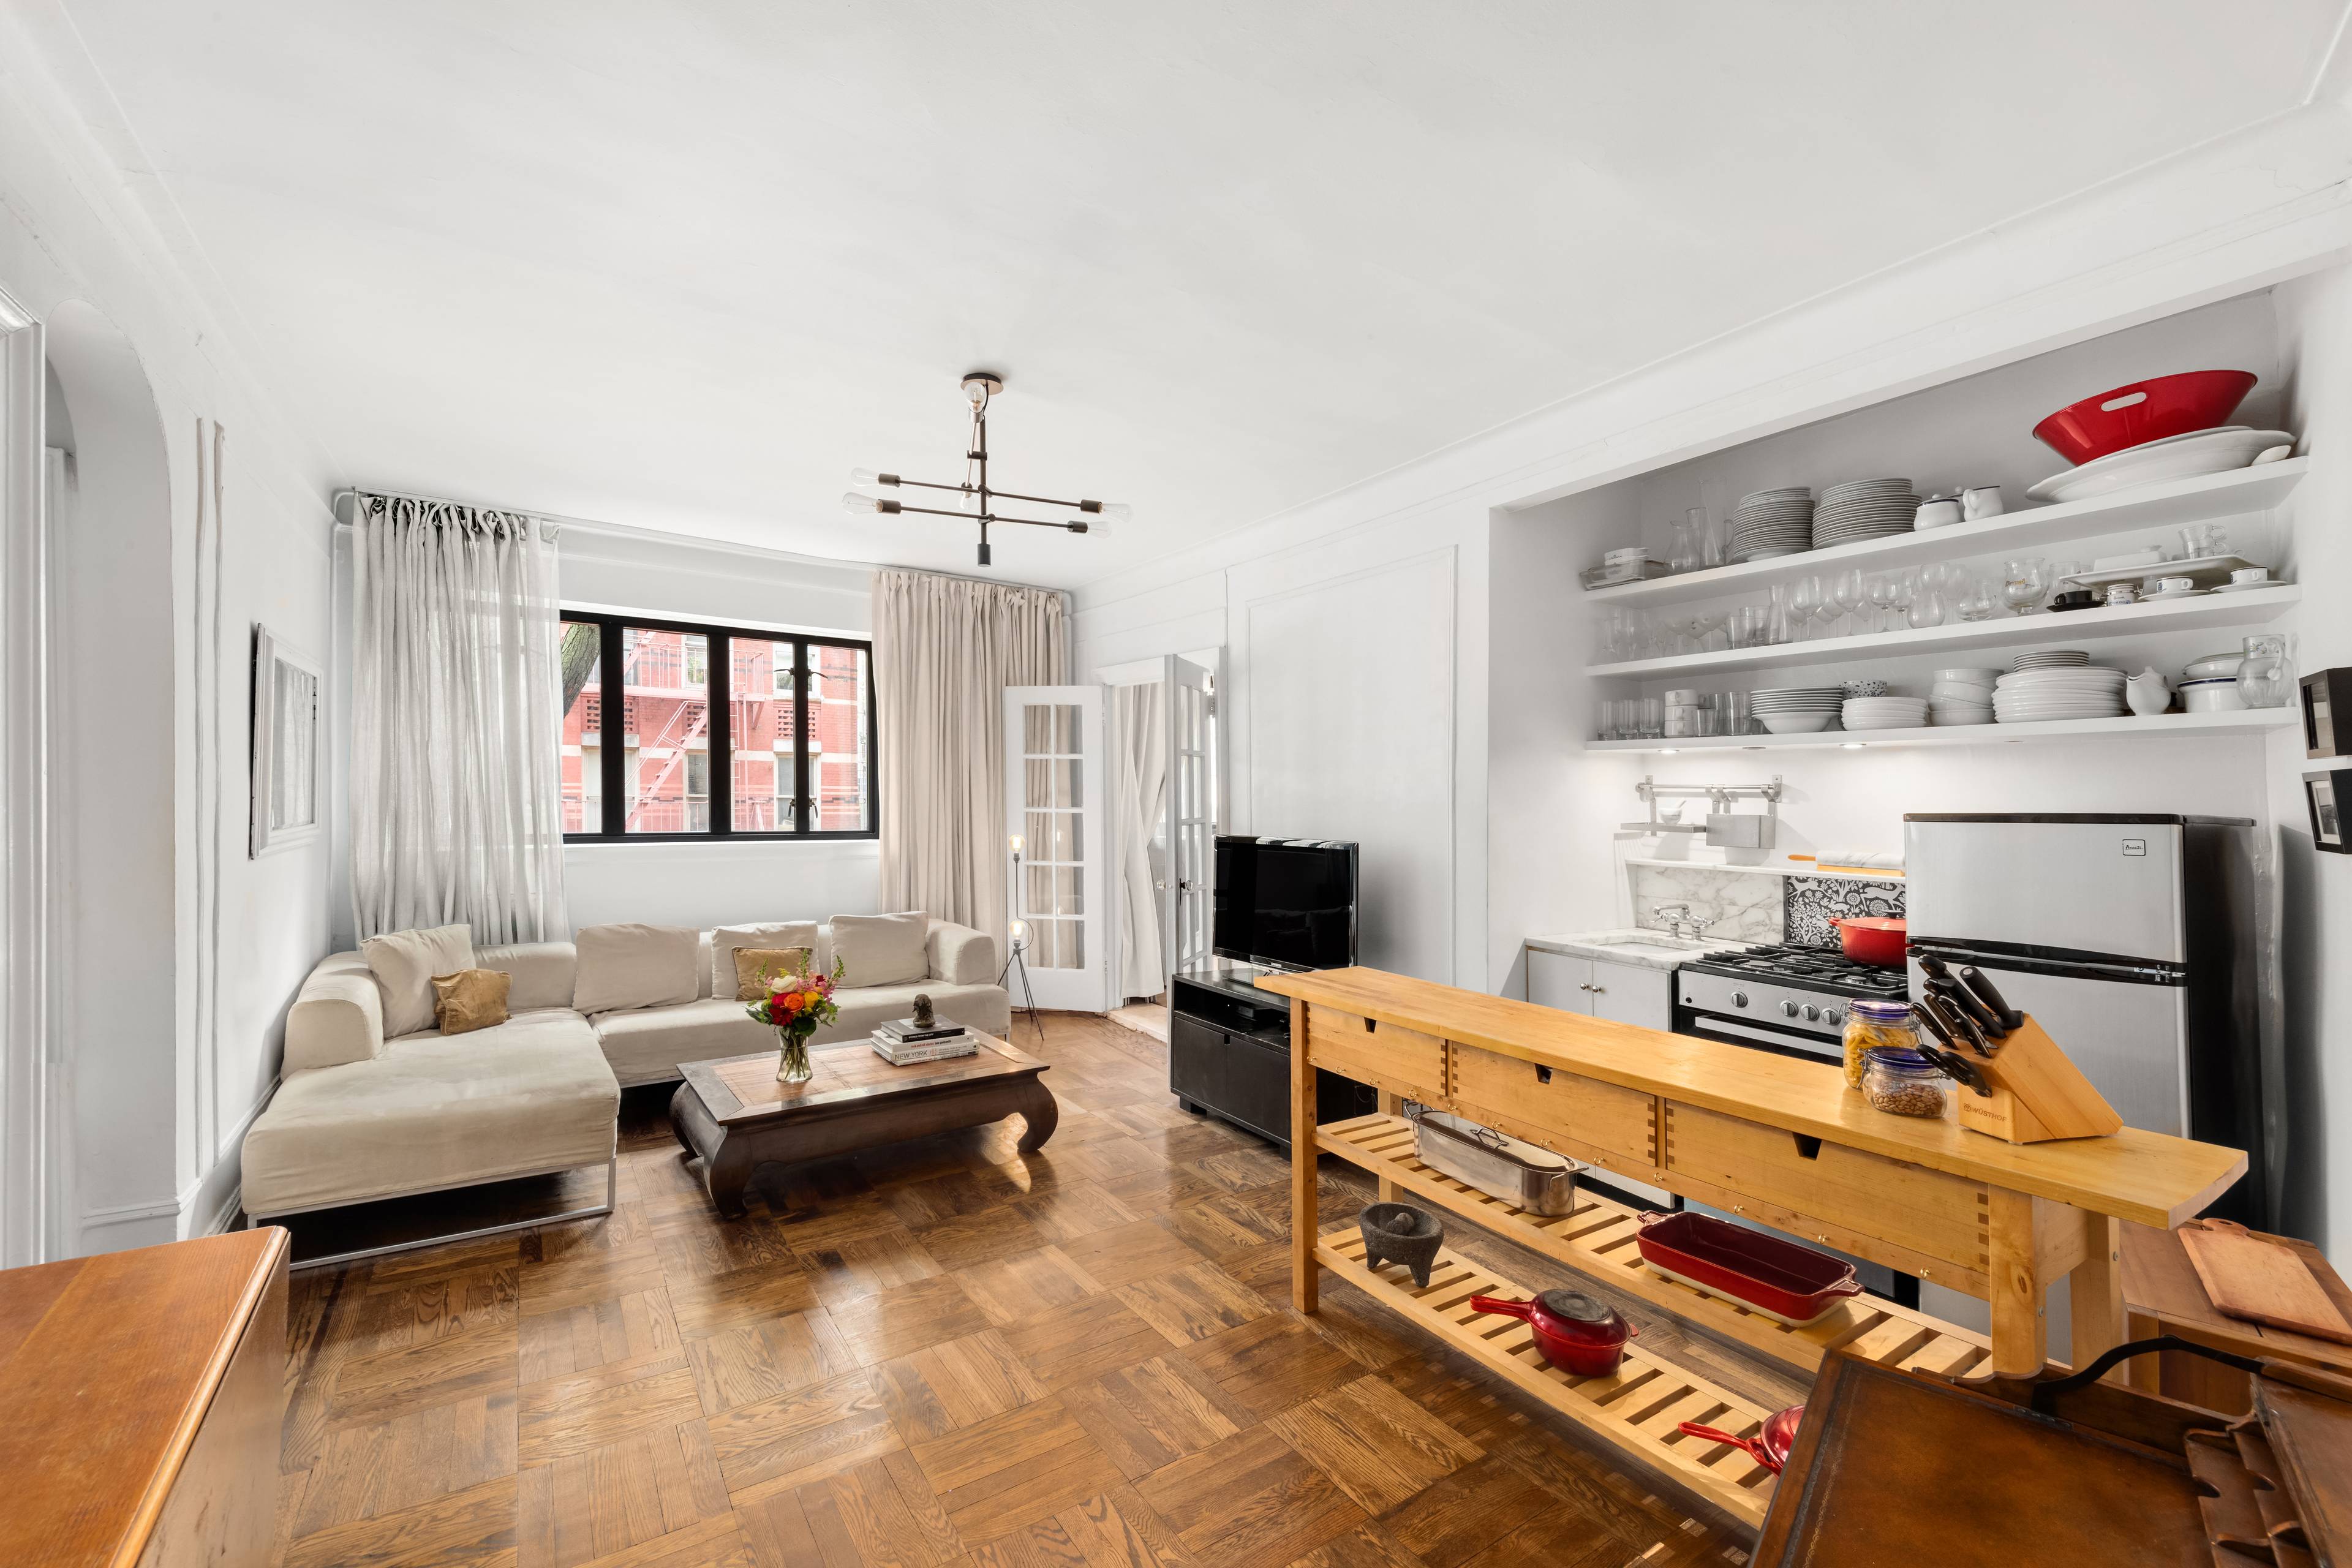 In SoHo, at the intersection of Hudson Square and the West Village, you will find a most welcoming home with an abundance of storage and all of the timeless accents ...